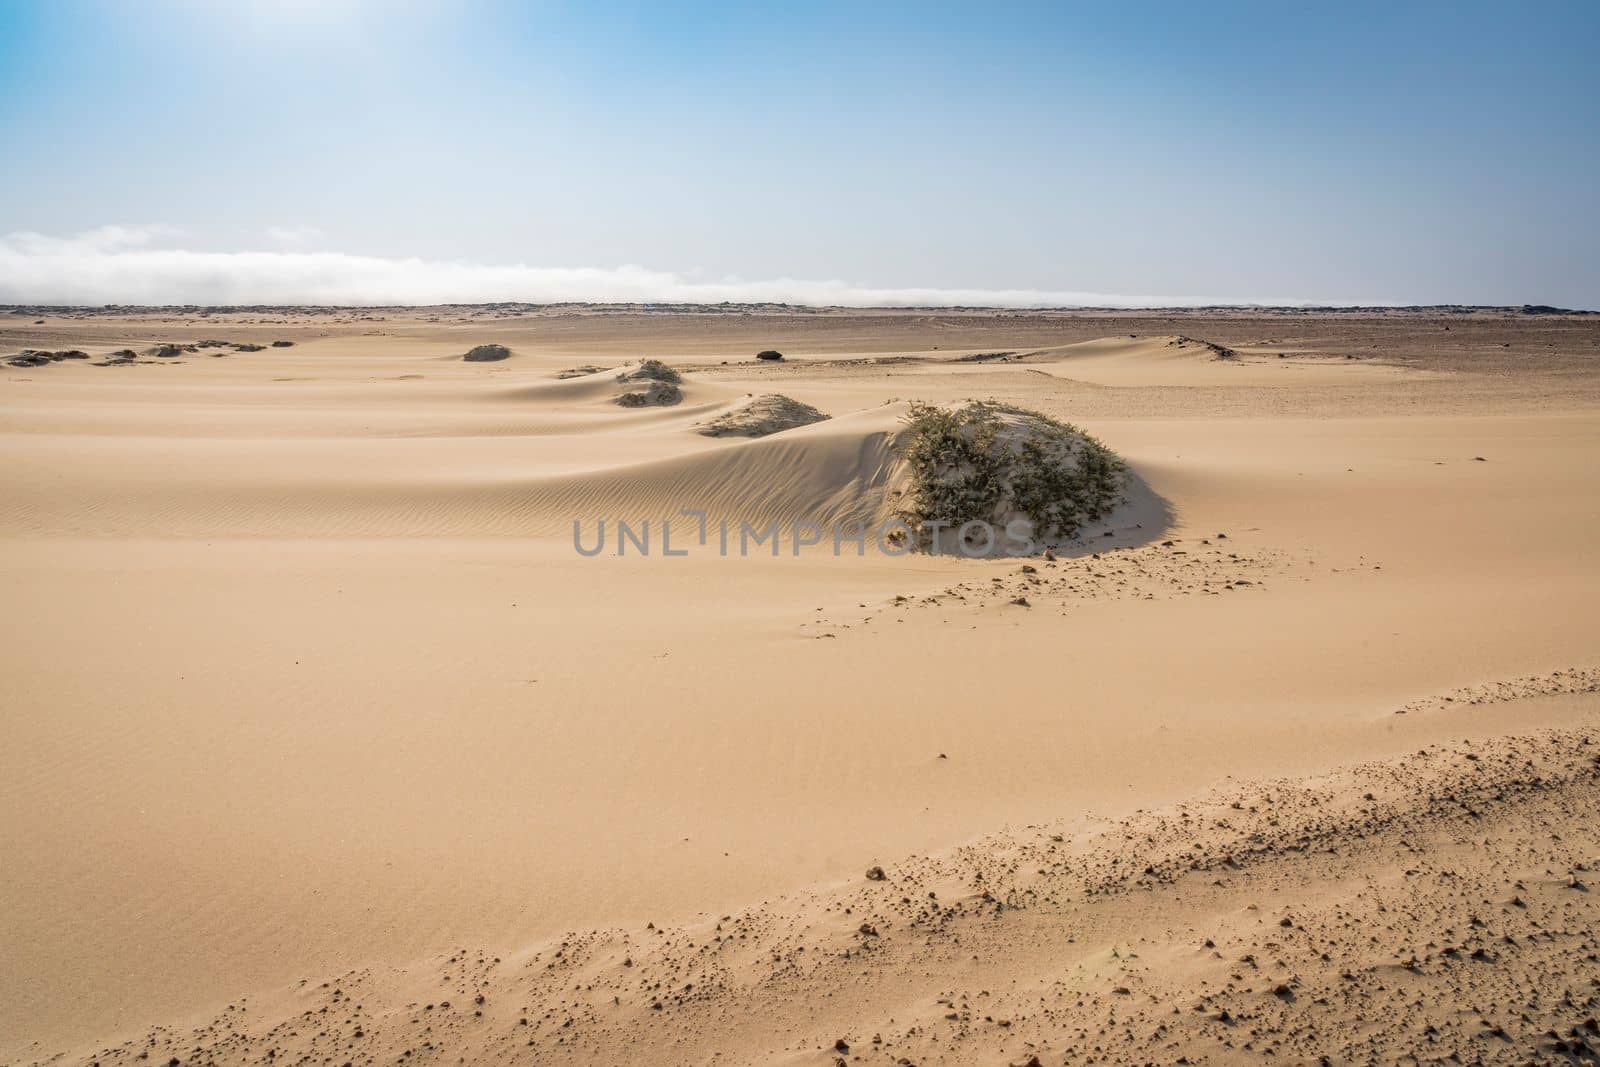 view of the Skeleton Coast desert dunes in Namibia, Africa. by maramade